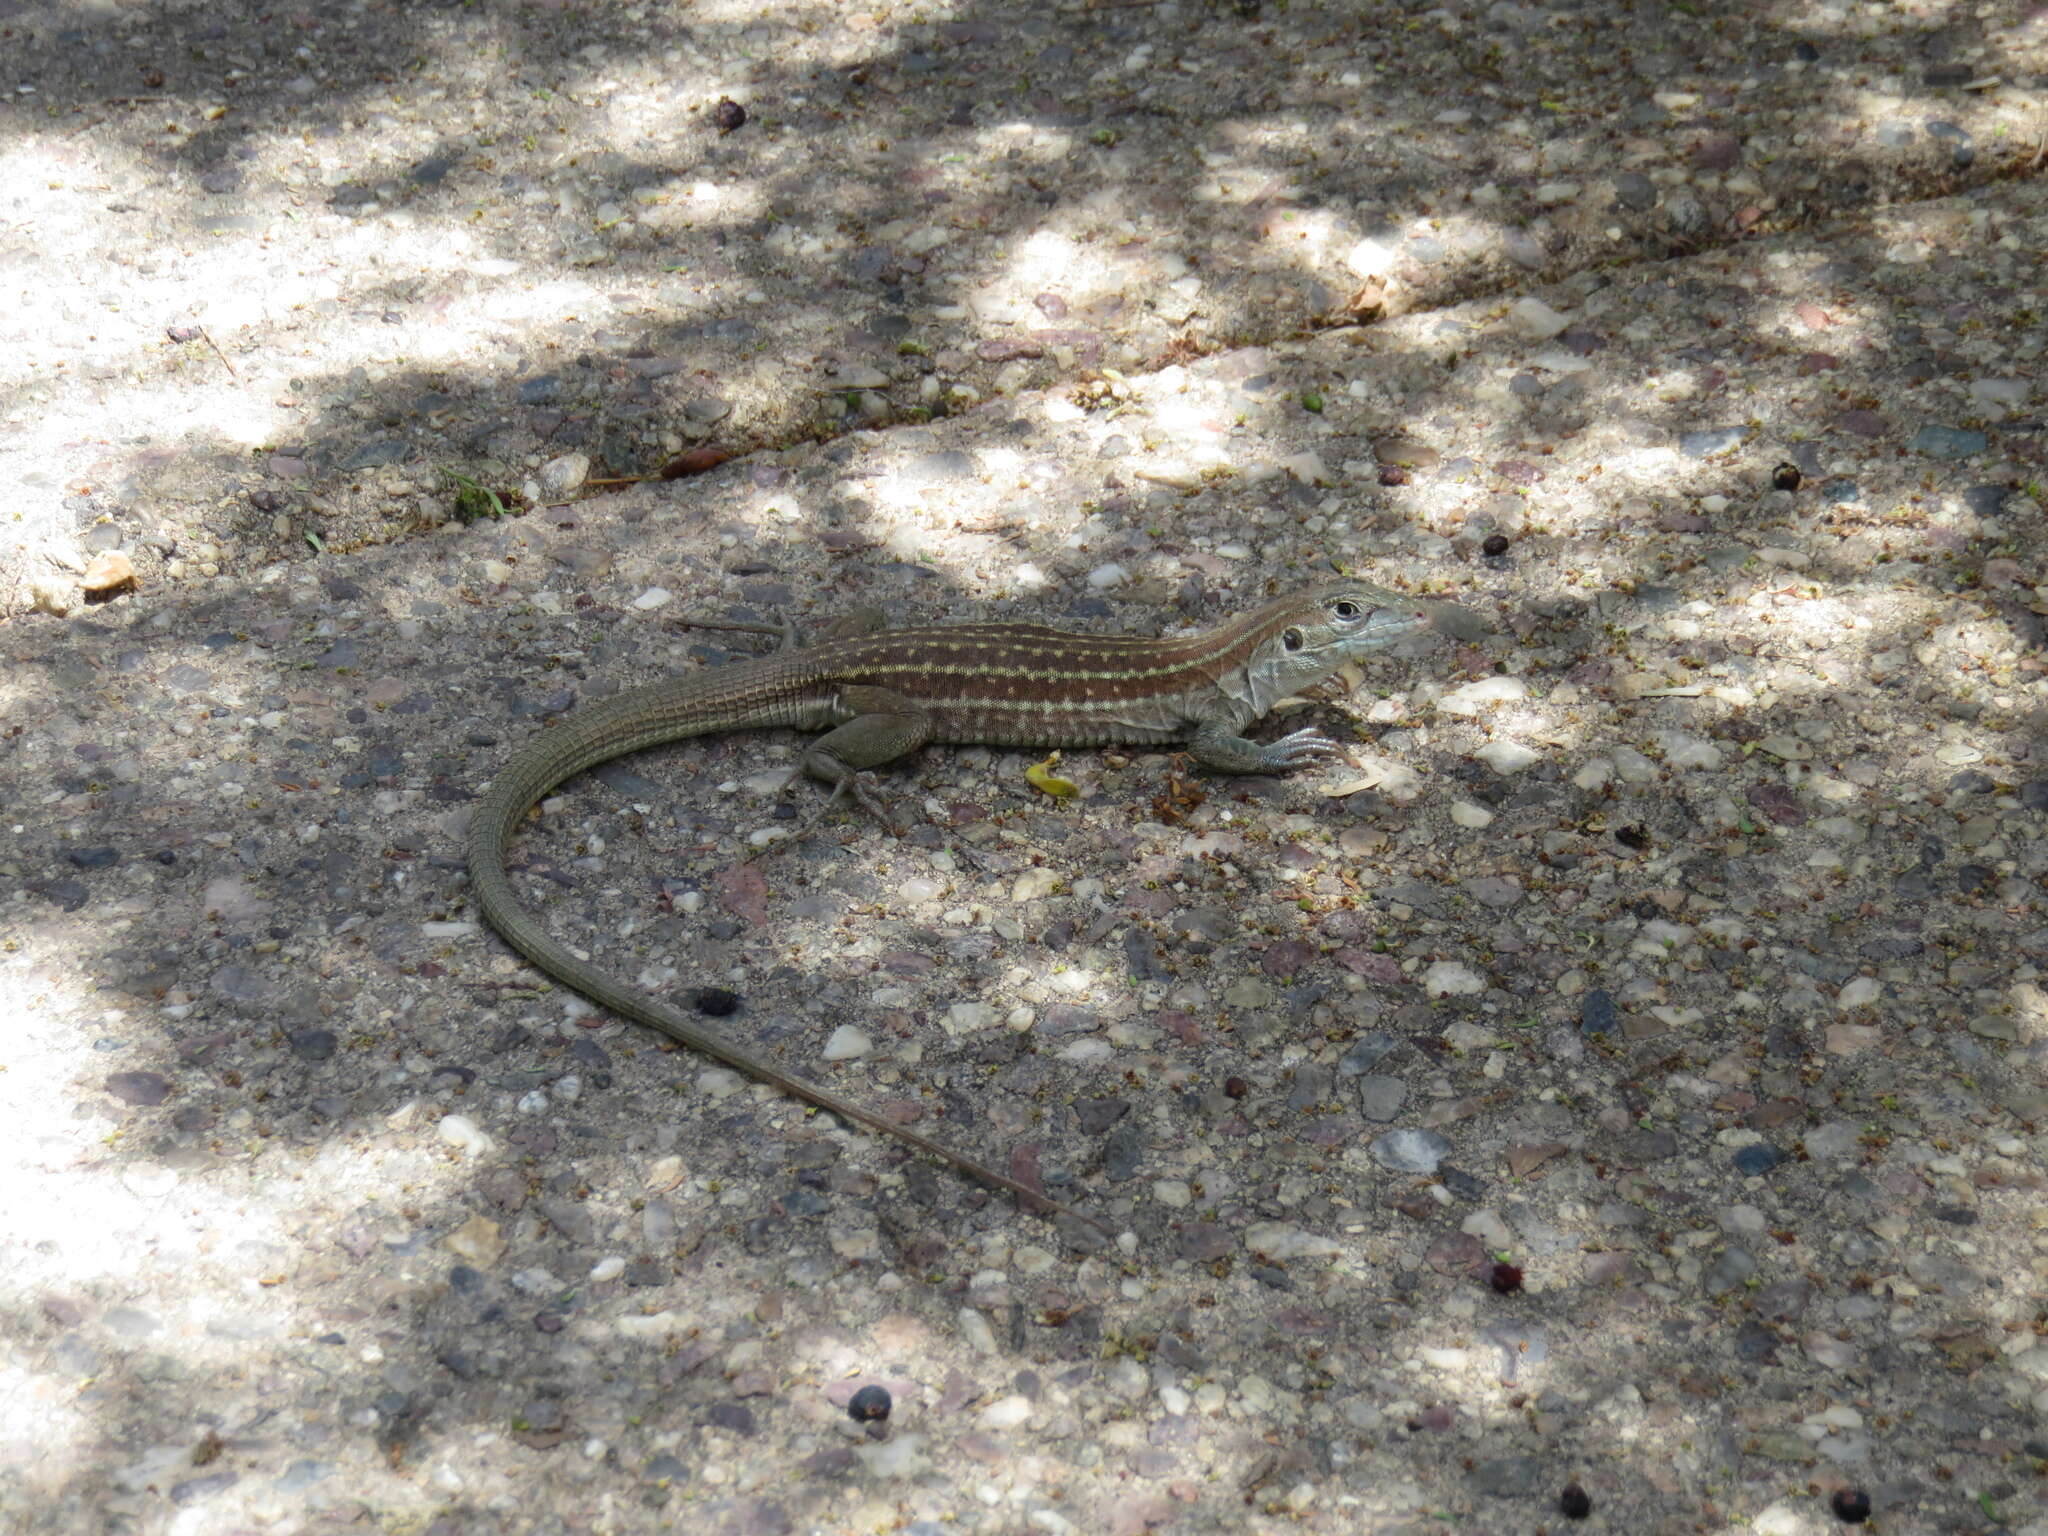 Image of Sonoran Spotted Whiptail